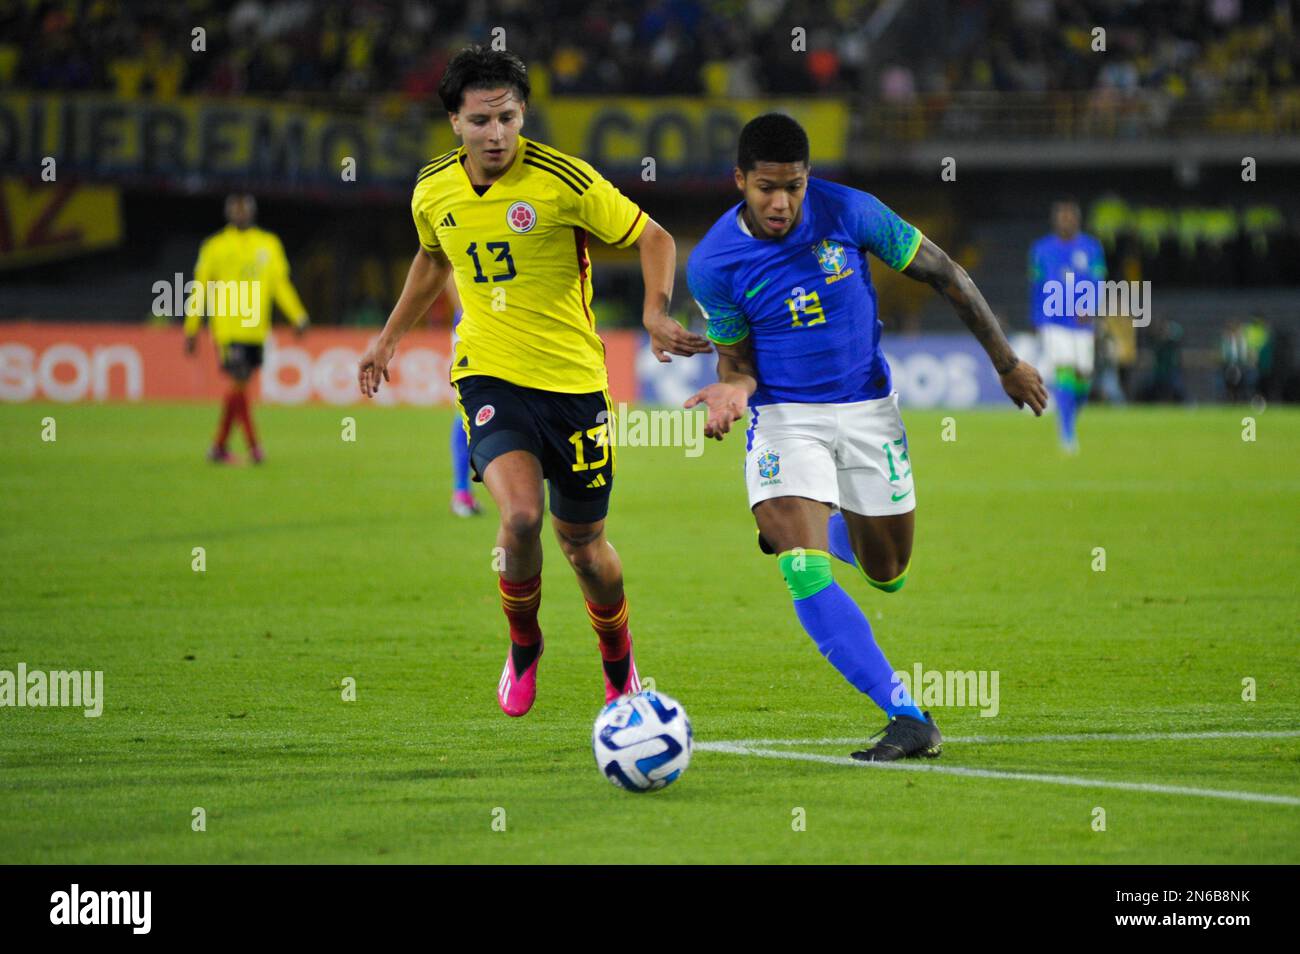 Bogota, Colombia on February 8, 2023. Colombia's Juan Castilla and Brazil's Andre Dhominique during the CONMEBOL South American U-20 Colombia tournament match between Colombia and Brazil, in Bogota, Colombia on February 8, 2023. Photo by: Chepa Beltran/Long Visual Press Stock Photo